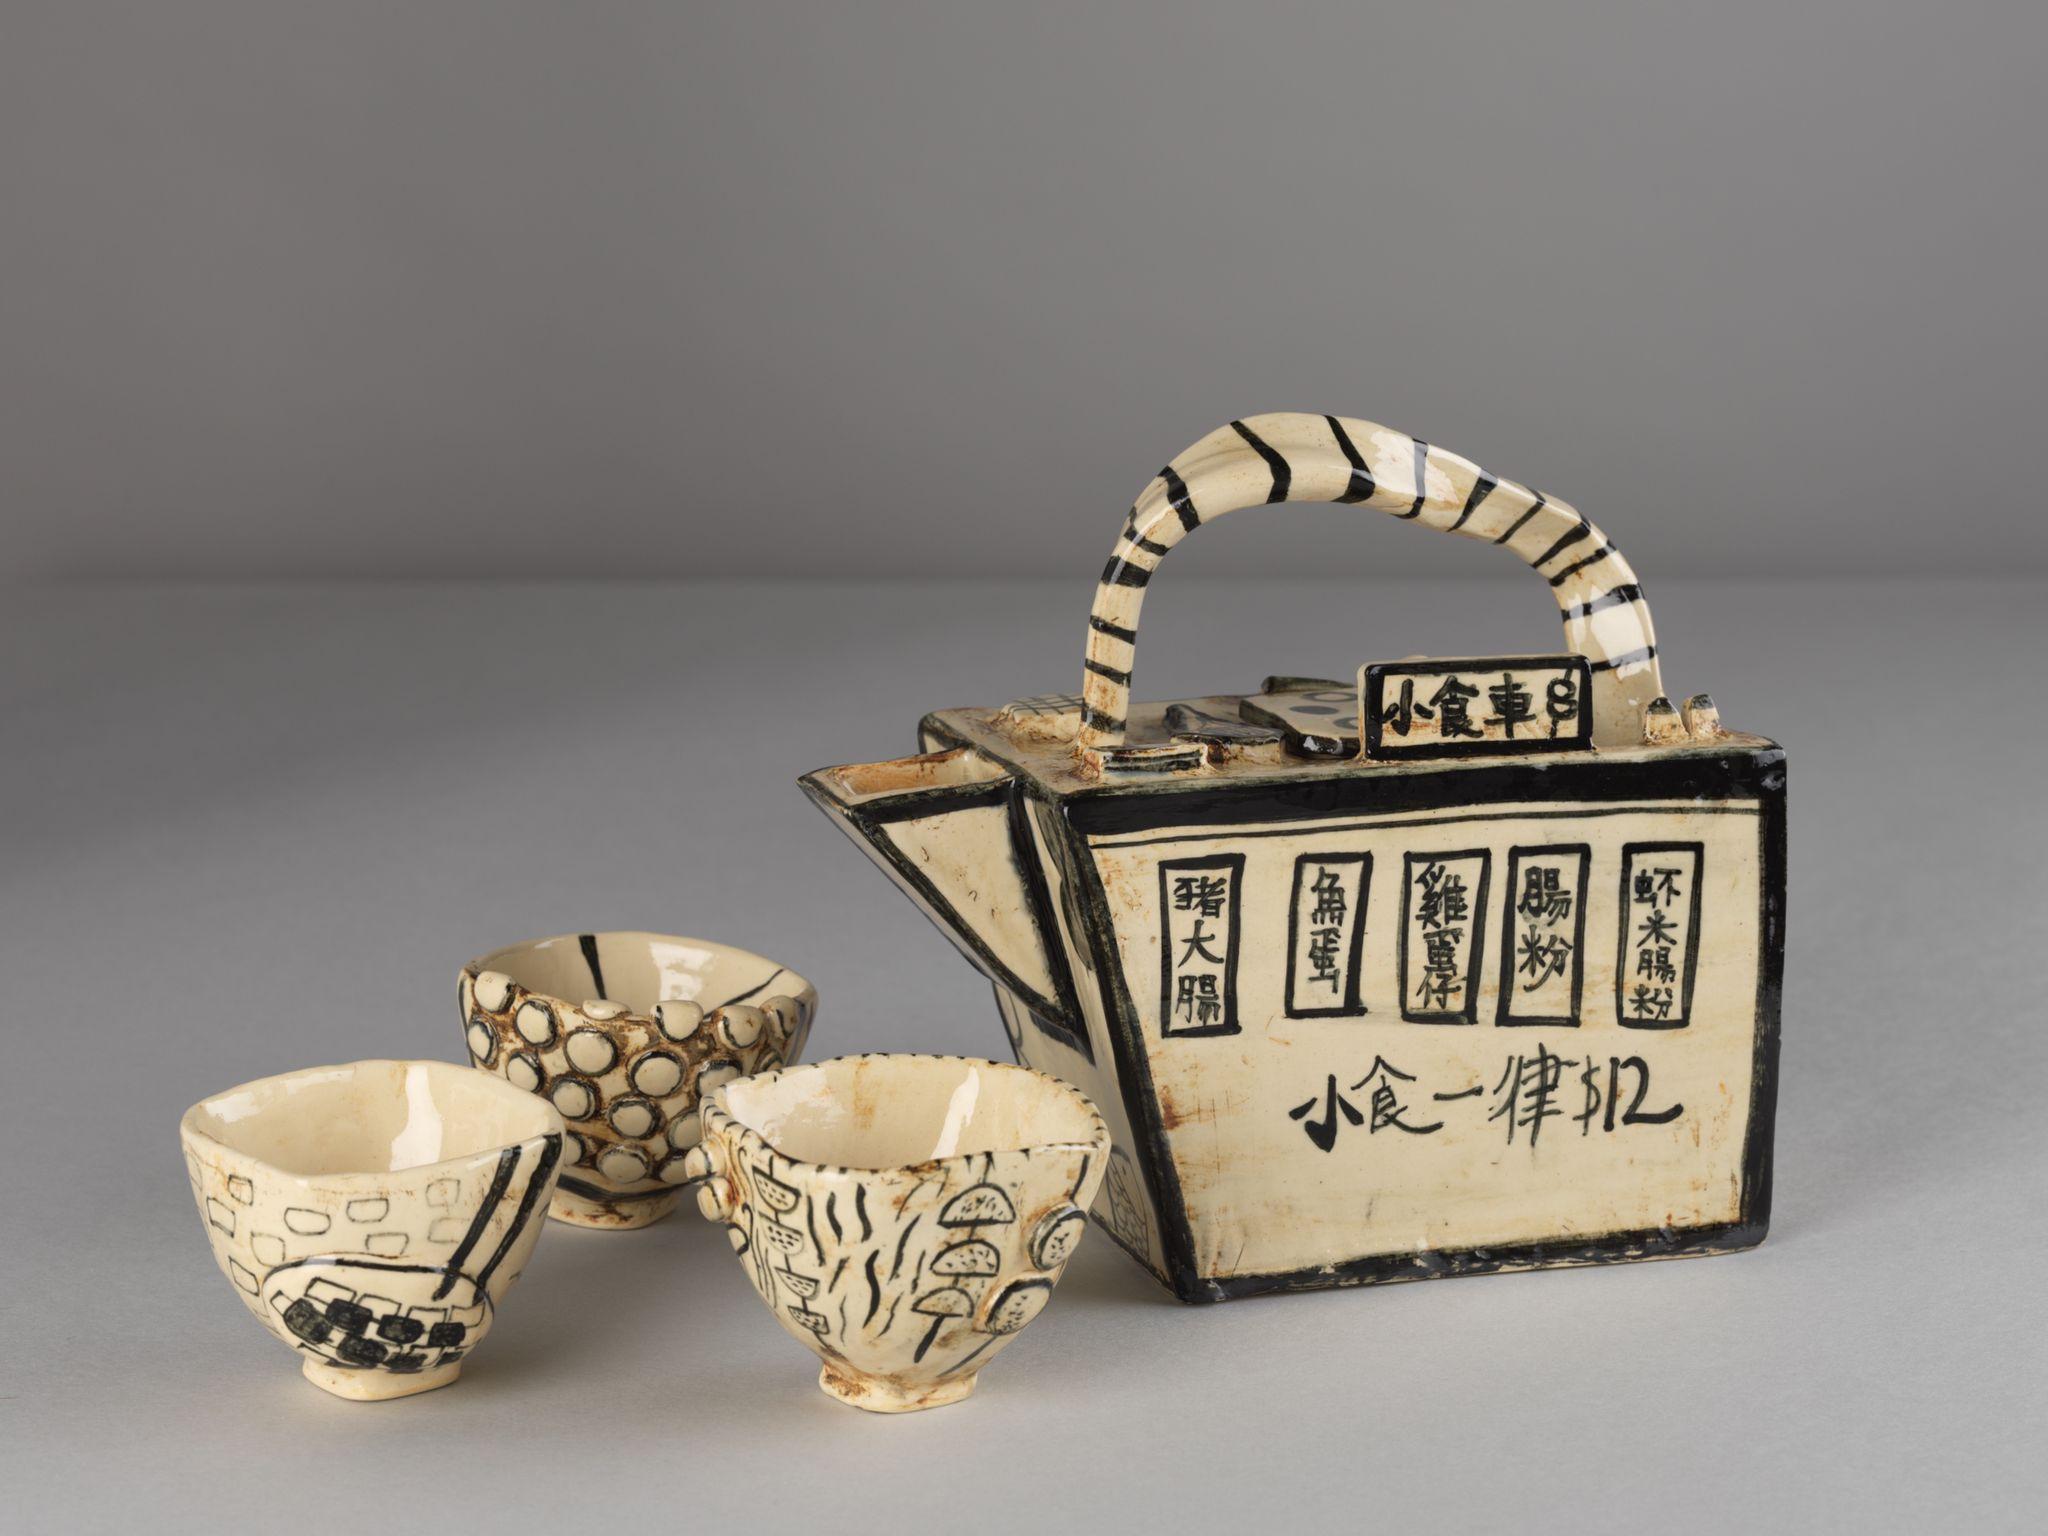 The "2021 Tea Ware by Hong Kong Potters" exhibition is being held at the Flagstaff House Museum of Tea Ware. Picture shows the Third Prize winner in the Student Category, Ho Kwun-chung's "Amazing Local Snacks".
